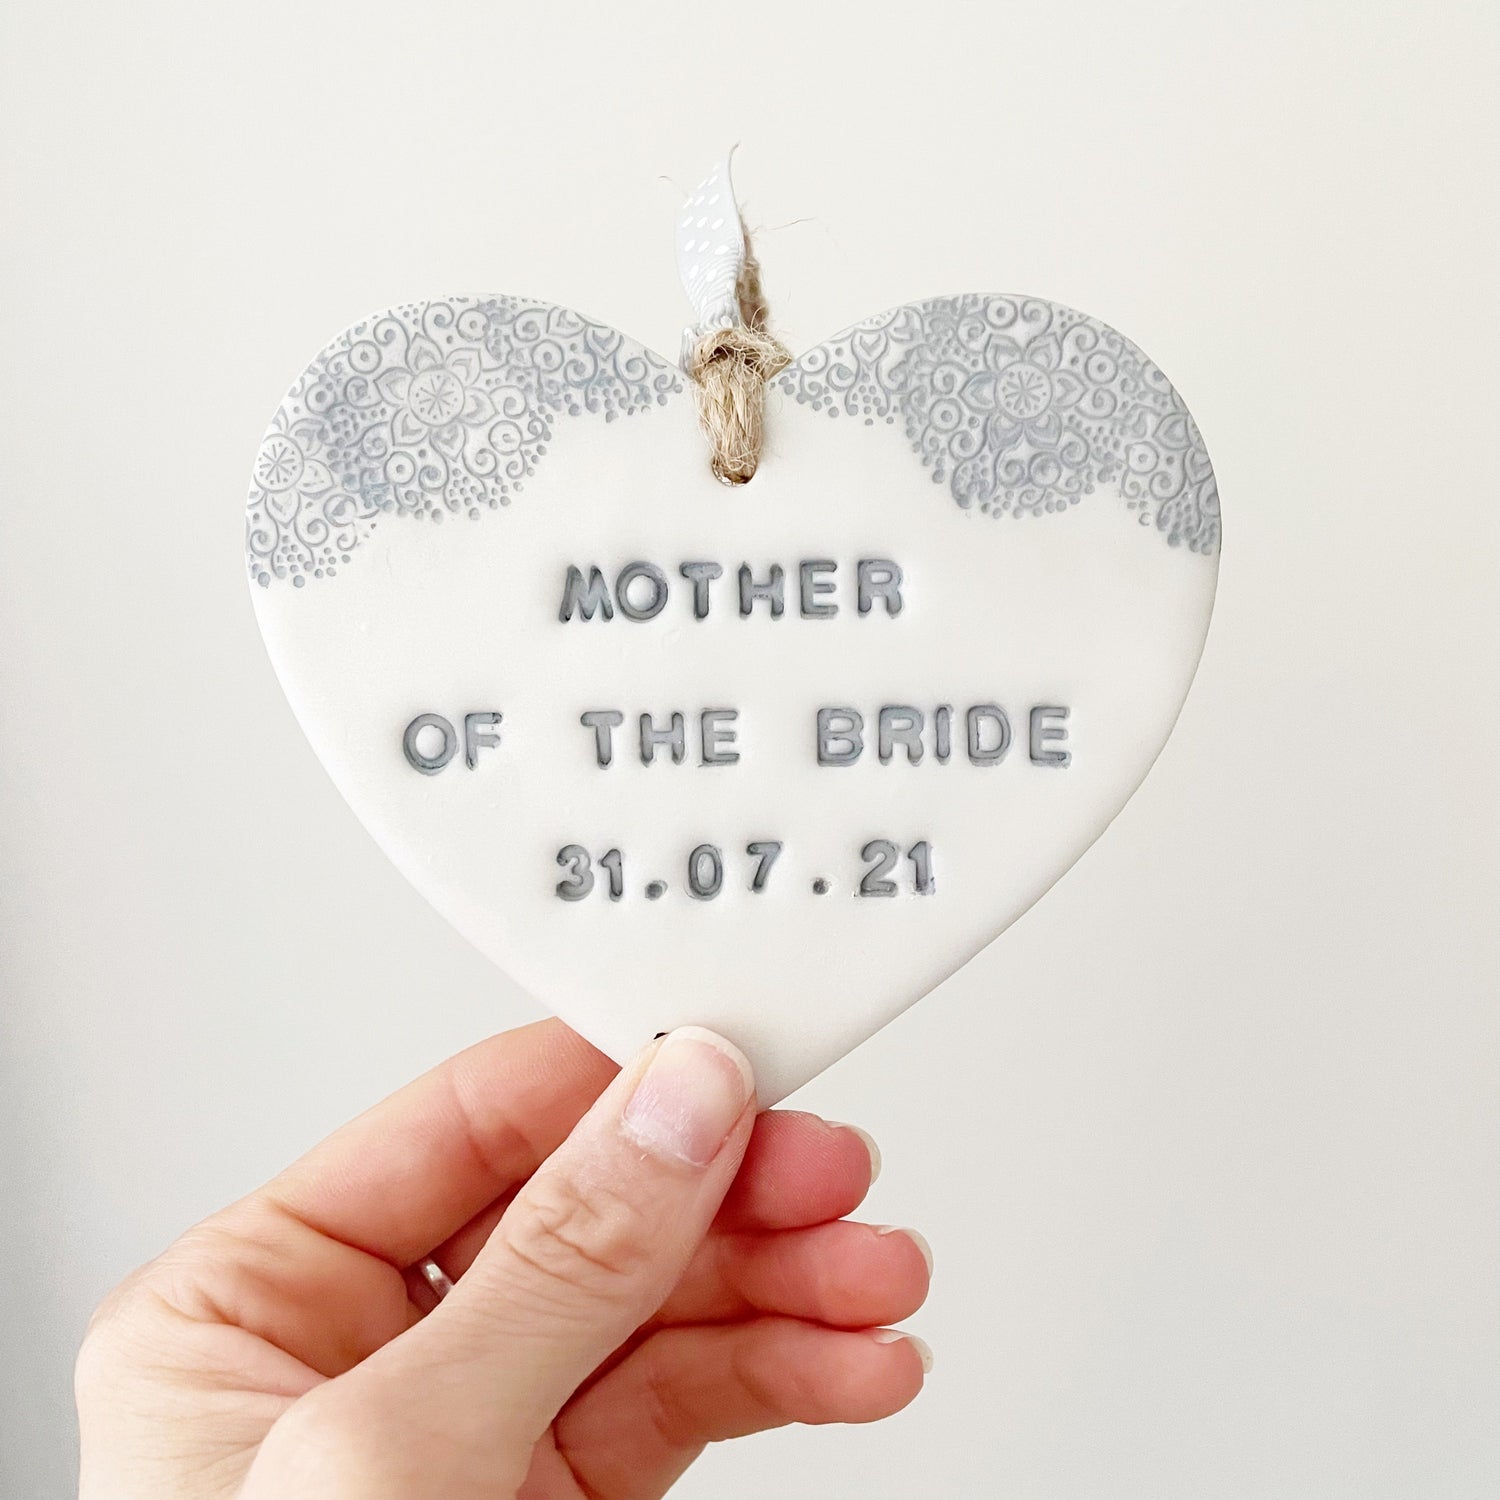 Personalised Bridesmaid thank you gift, pearlised white clay hanging heart with a grey lace edge at the top of the heart, the heart is personalised with MOTHER OF THE BRIDE 31.07.21